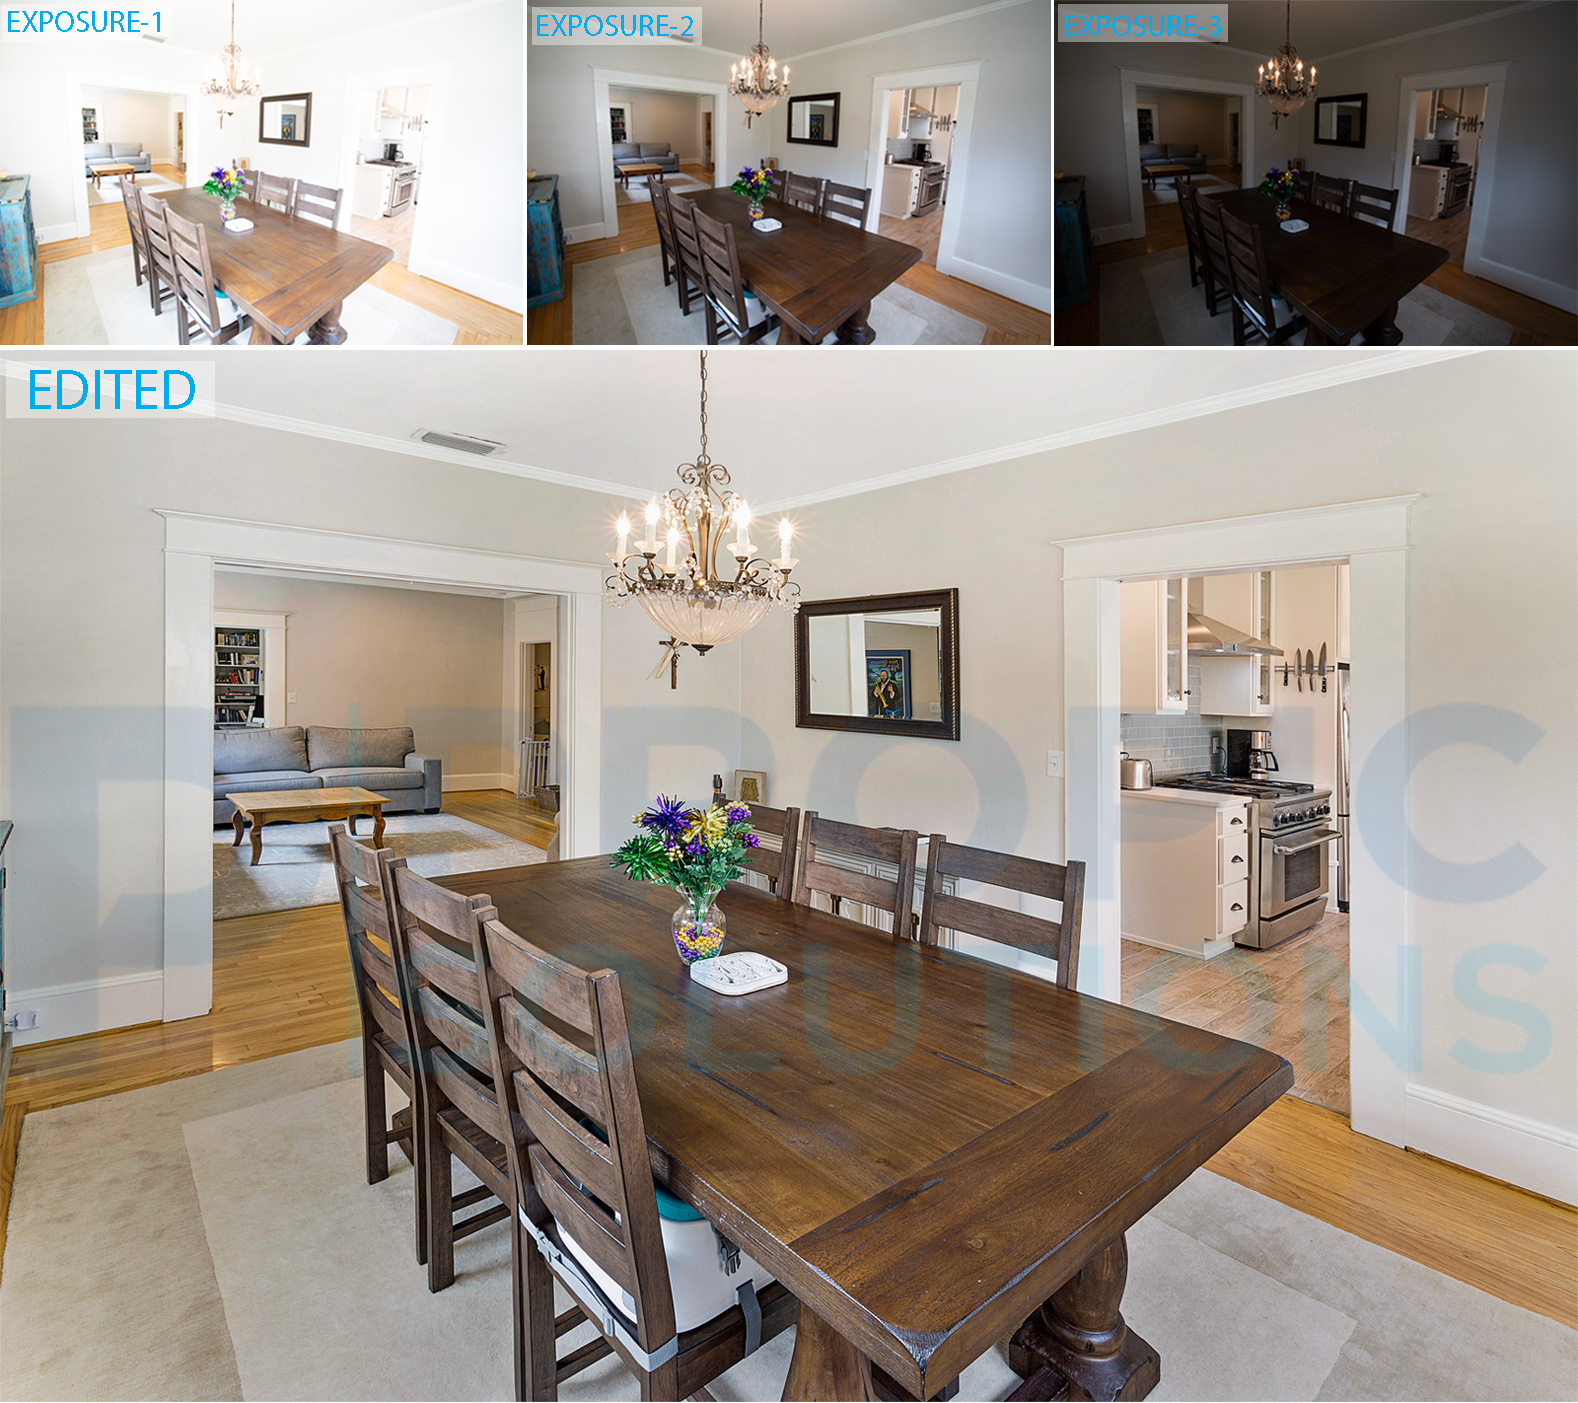 real estate hdr photo editing services